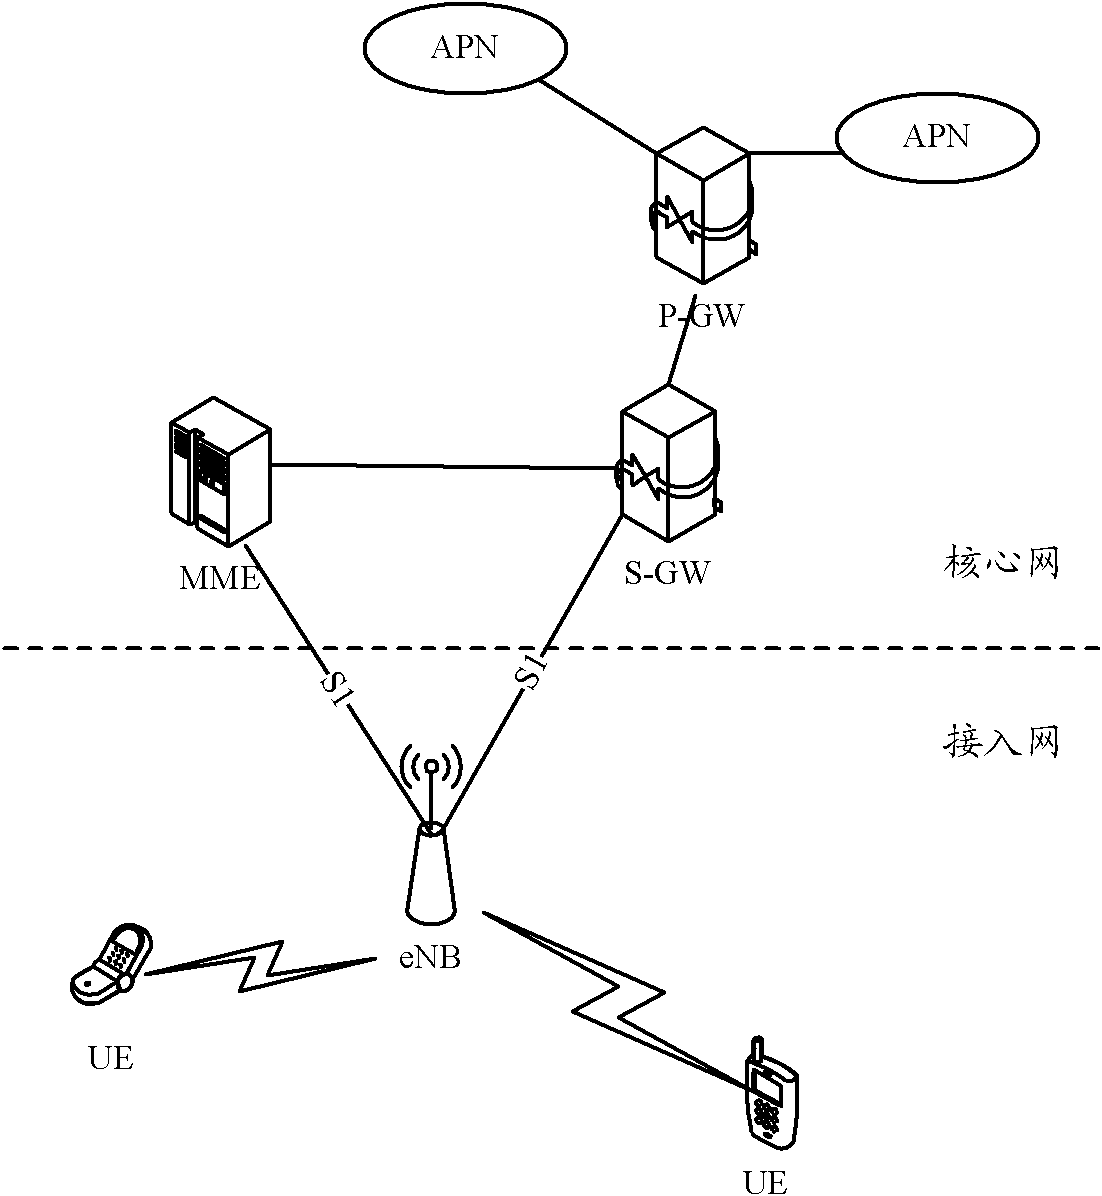 Method for performing terminal operation configuration at network side and network side device